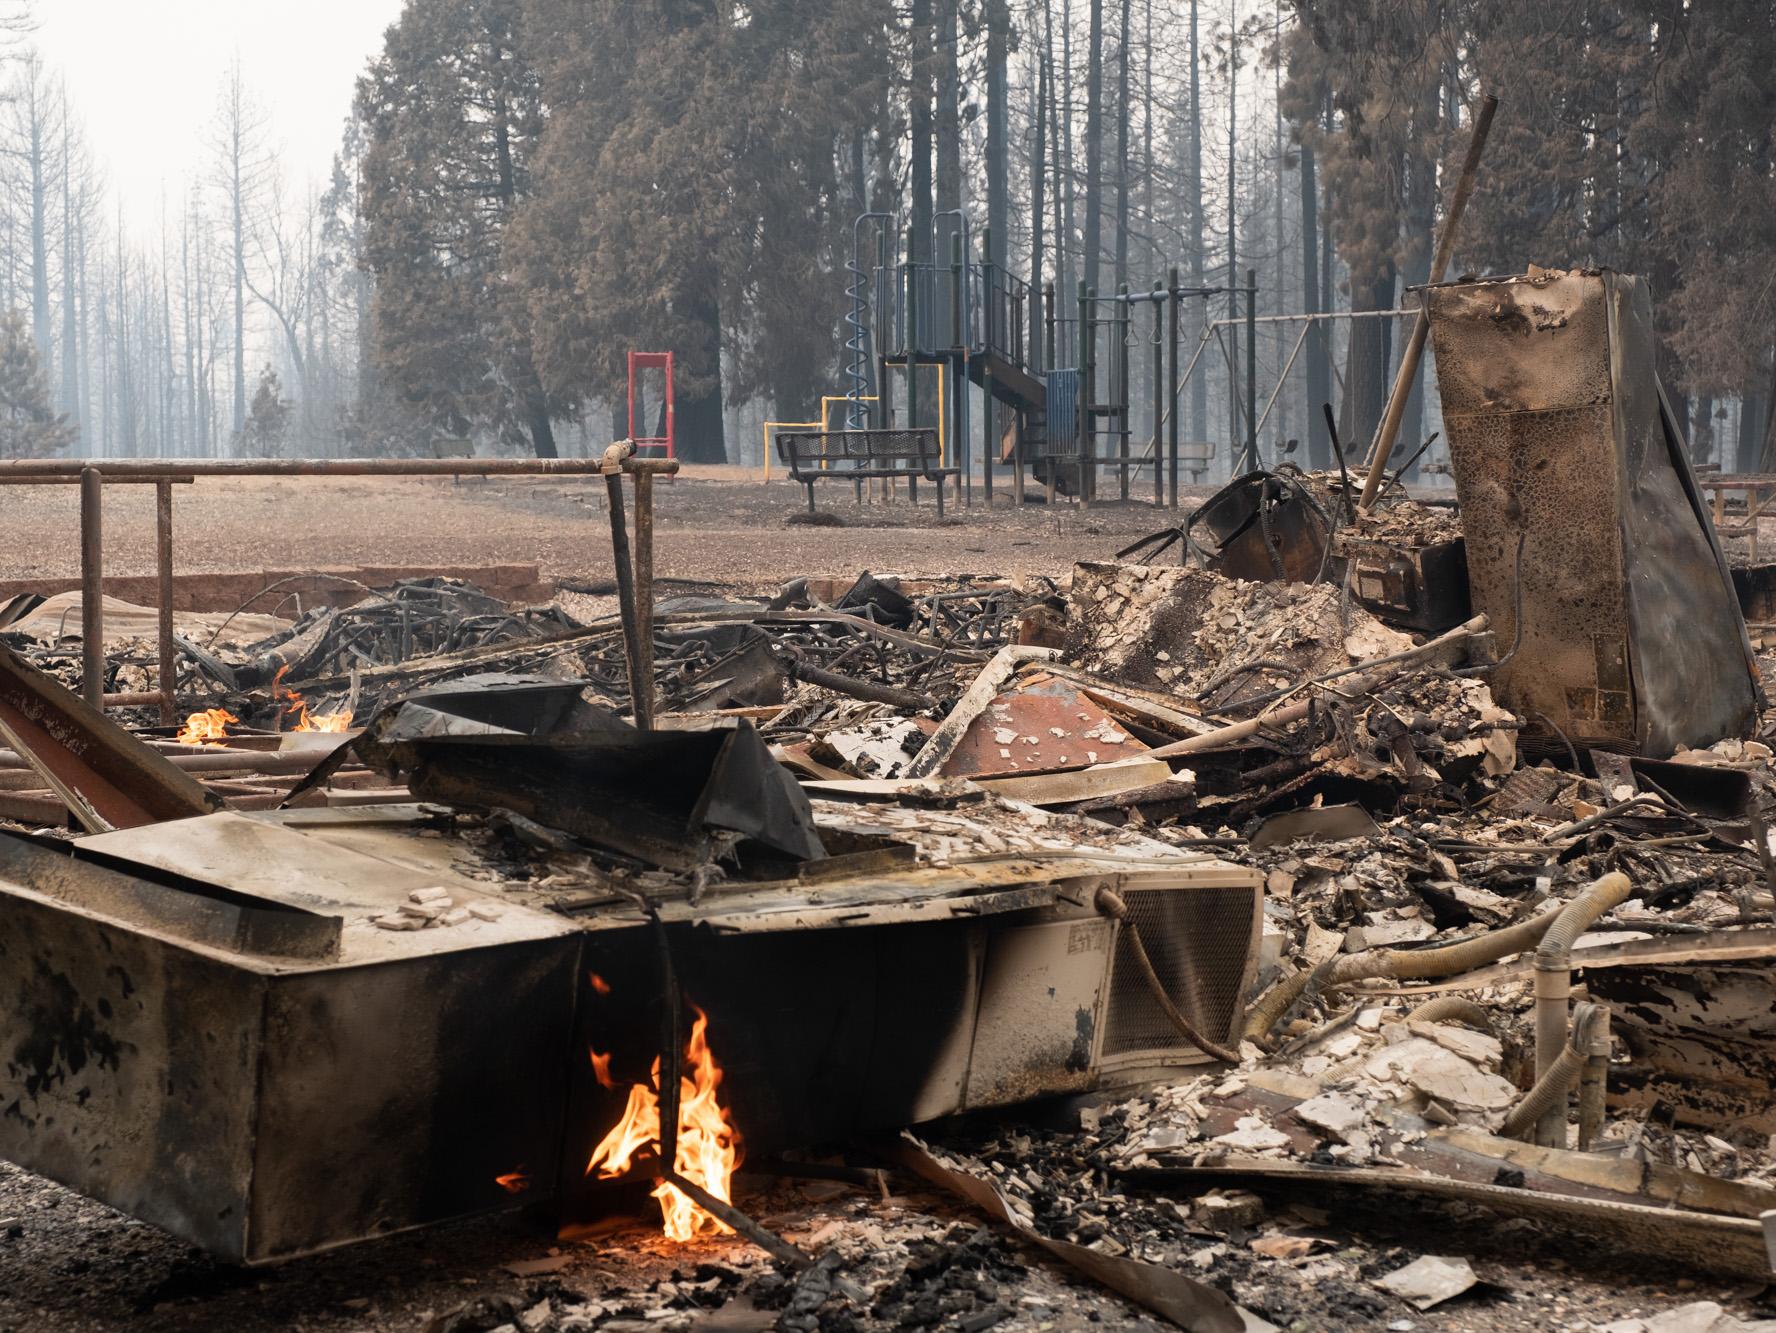 BURNED: As California wildfires threaten rural communities, Forest Service  prevention efforts stall out - capradio.org